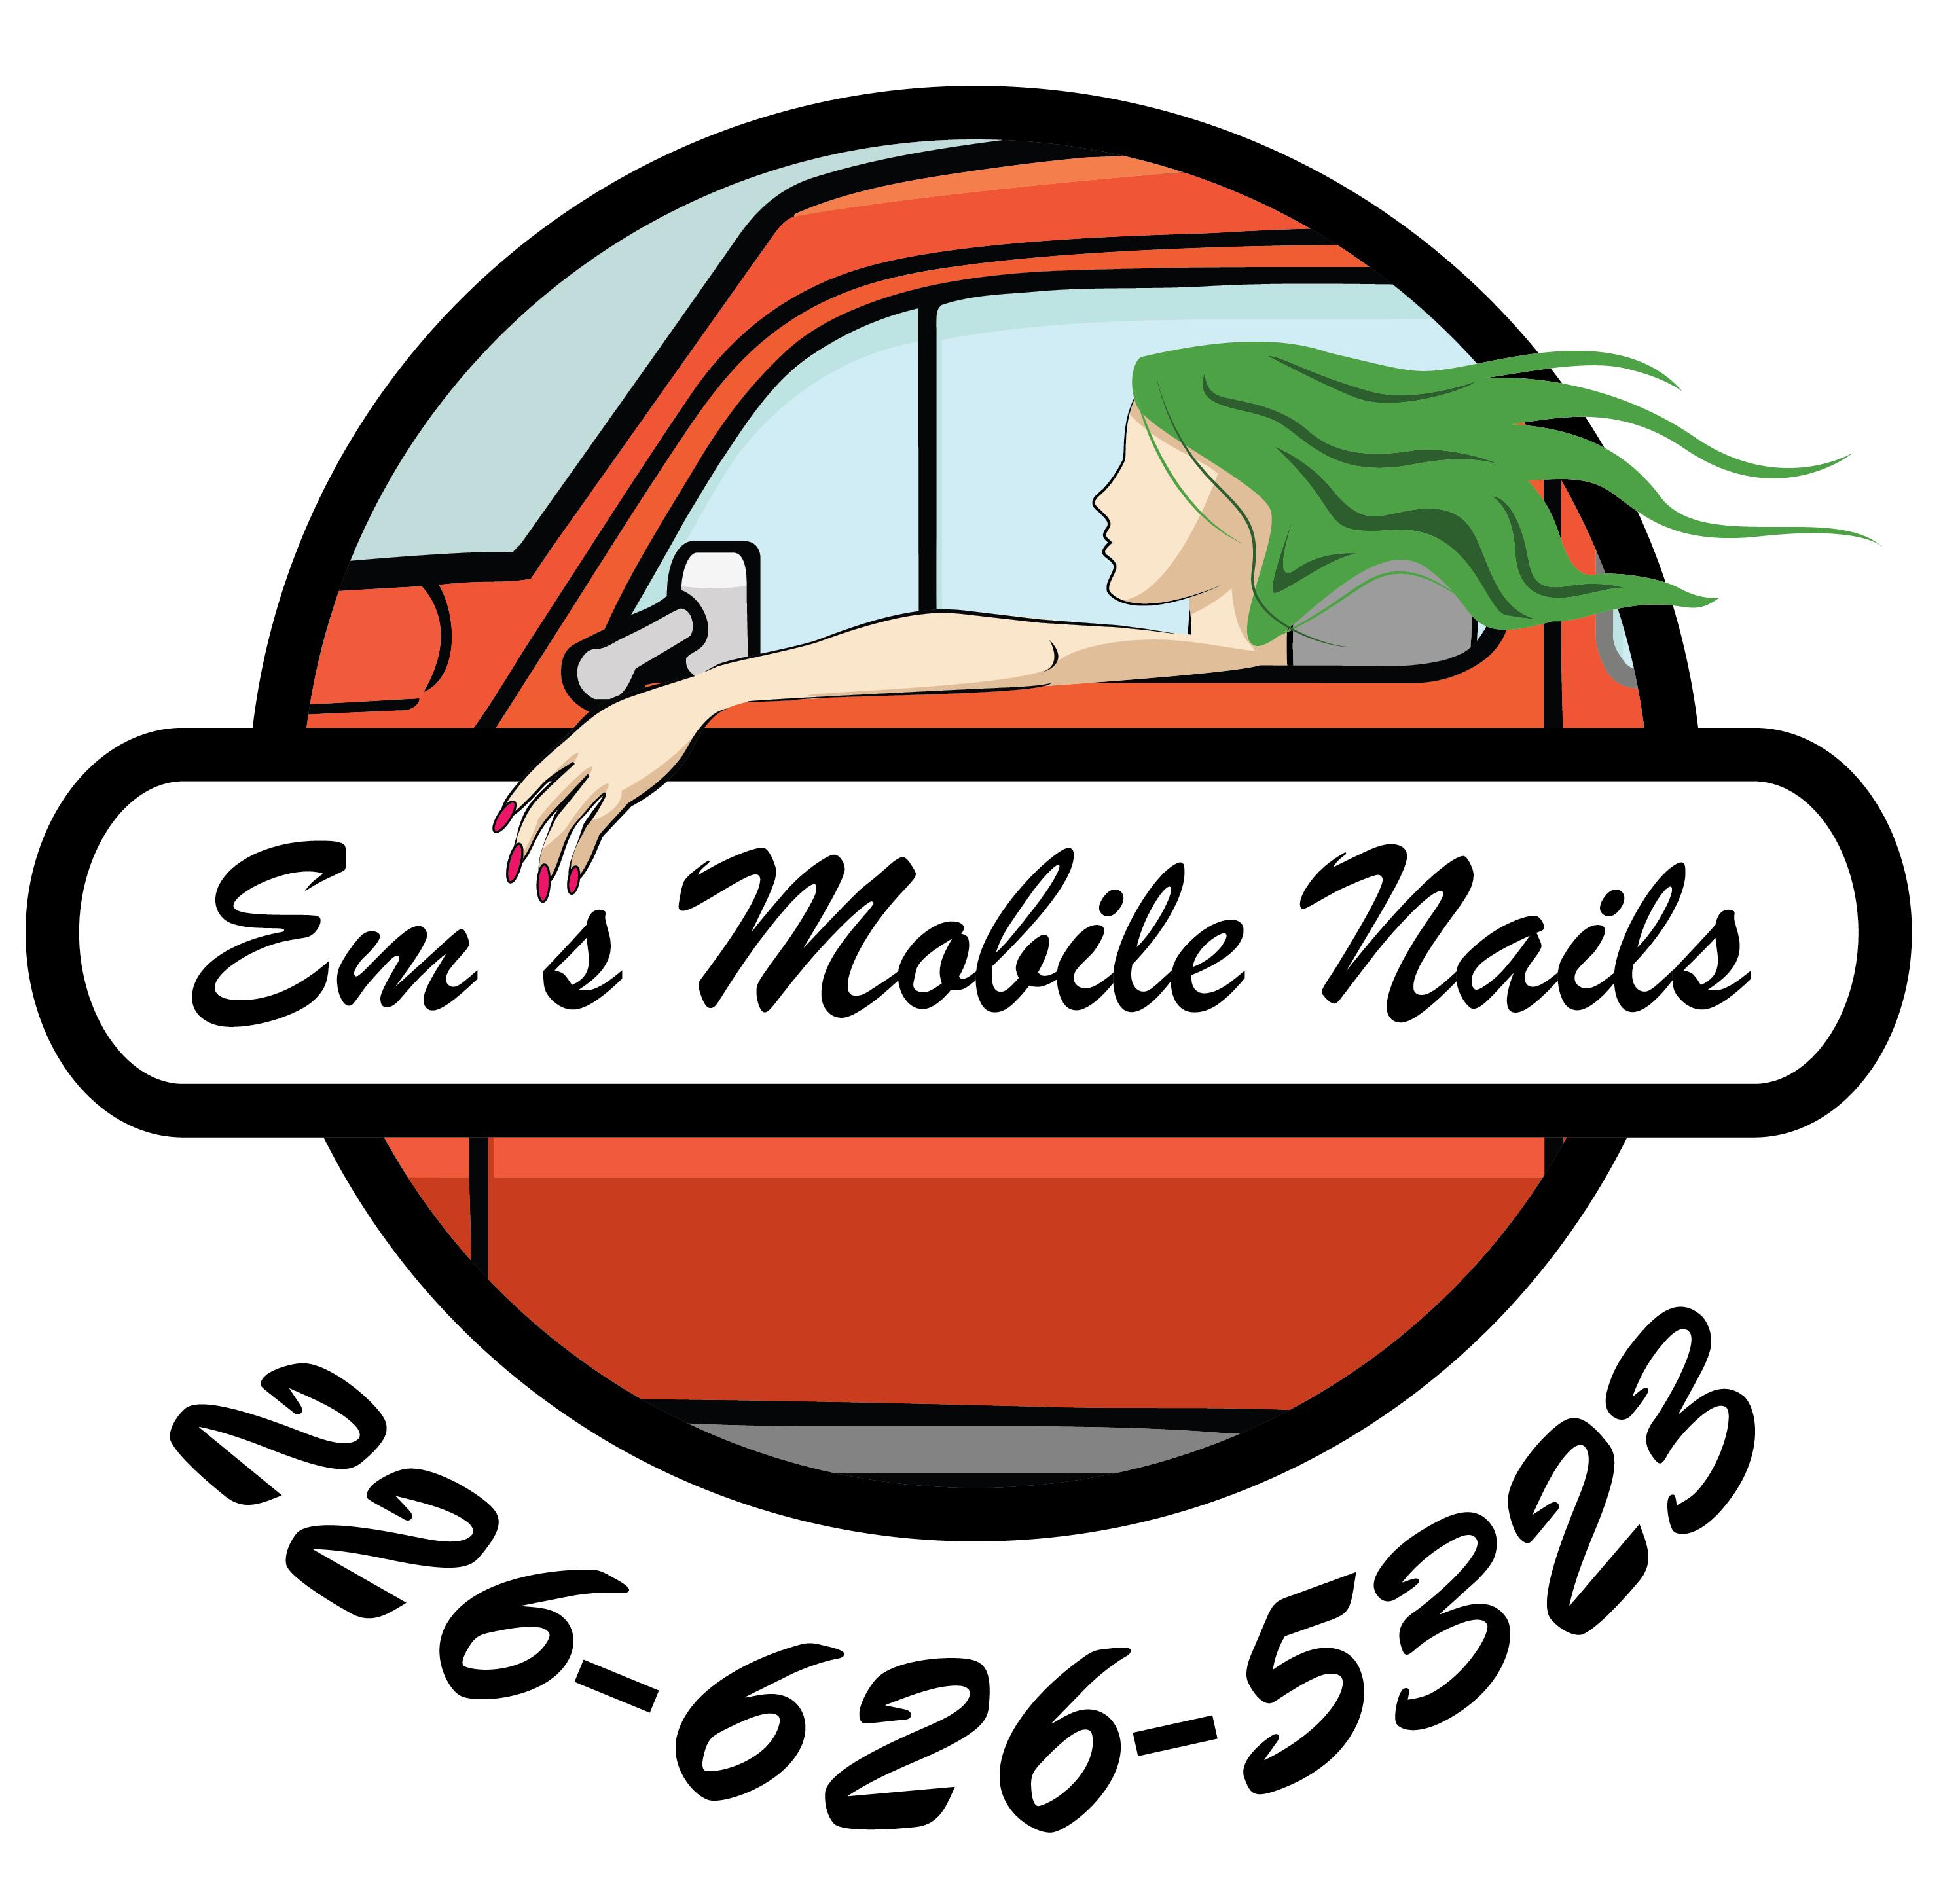 Em's Mobile Nails Foot Care Specialist 